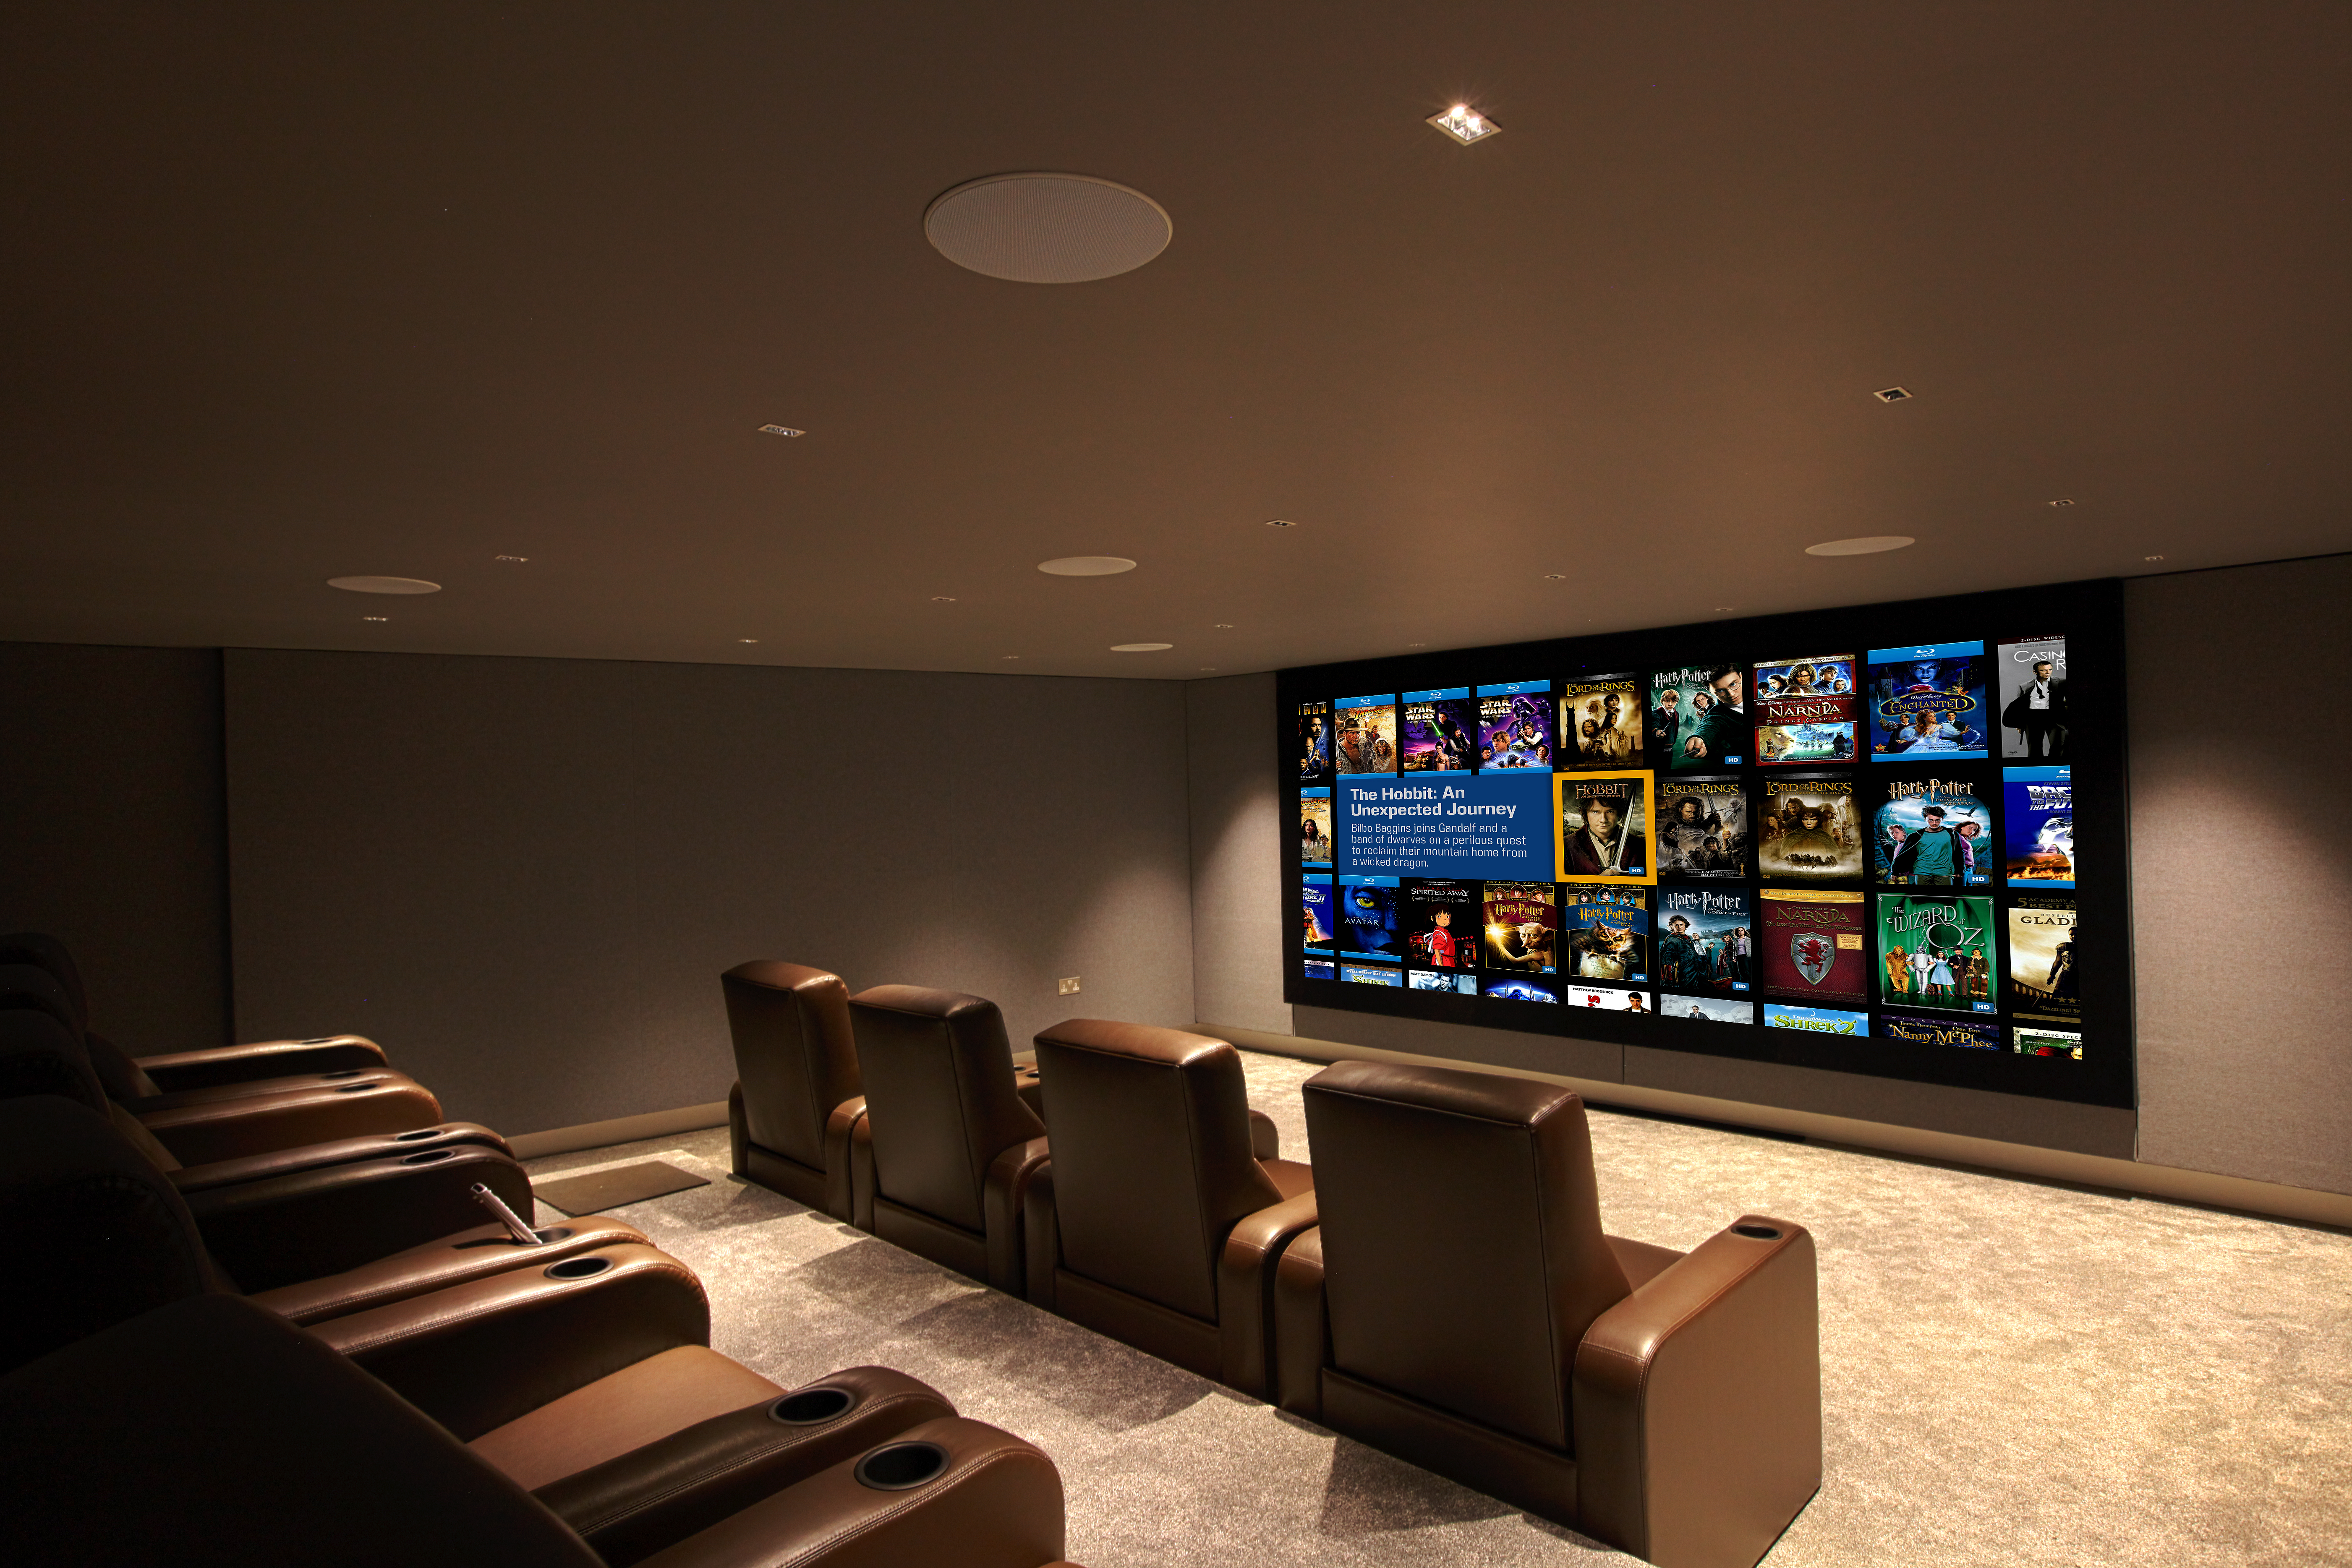 Home cinema, with leather seating and large screen showing Kaleidescape image.